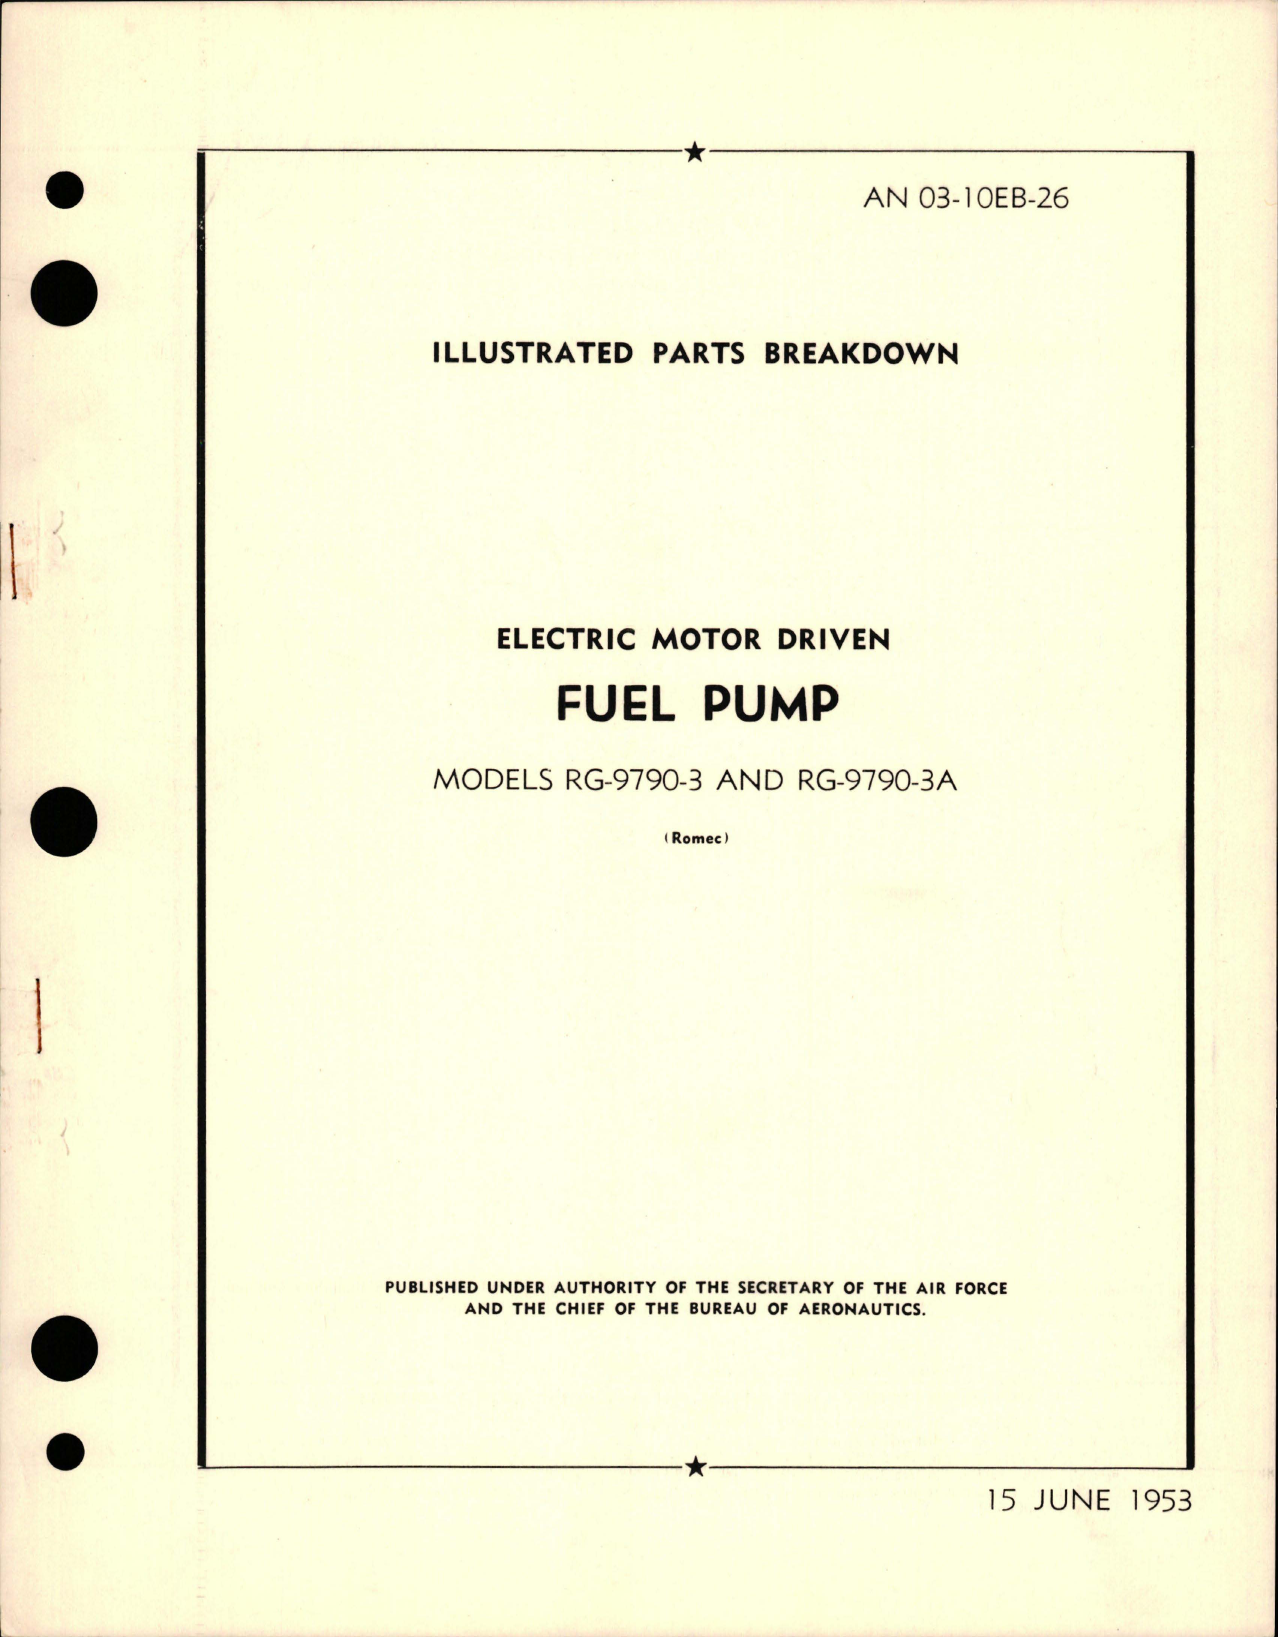 Sample page 1 from AirCorps Library document: Illustrated Parts Breakdown for Electric Motor Driven Fuel Pump - Models RG-9790-3 and RG-9790-3A 